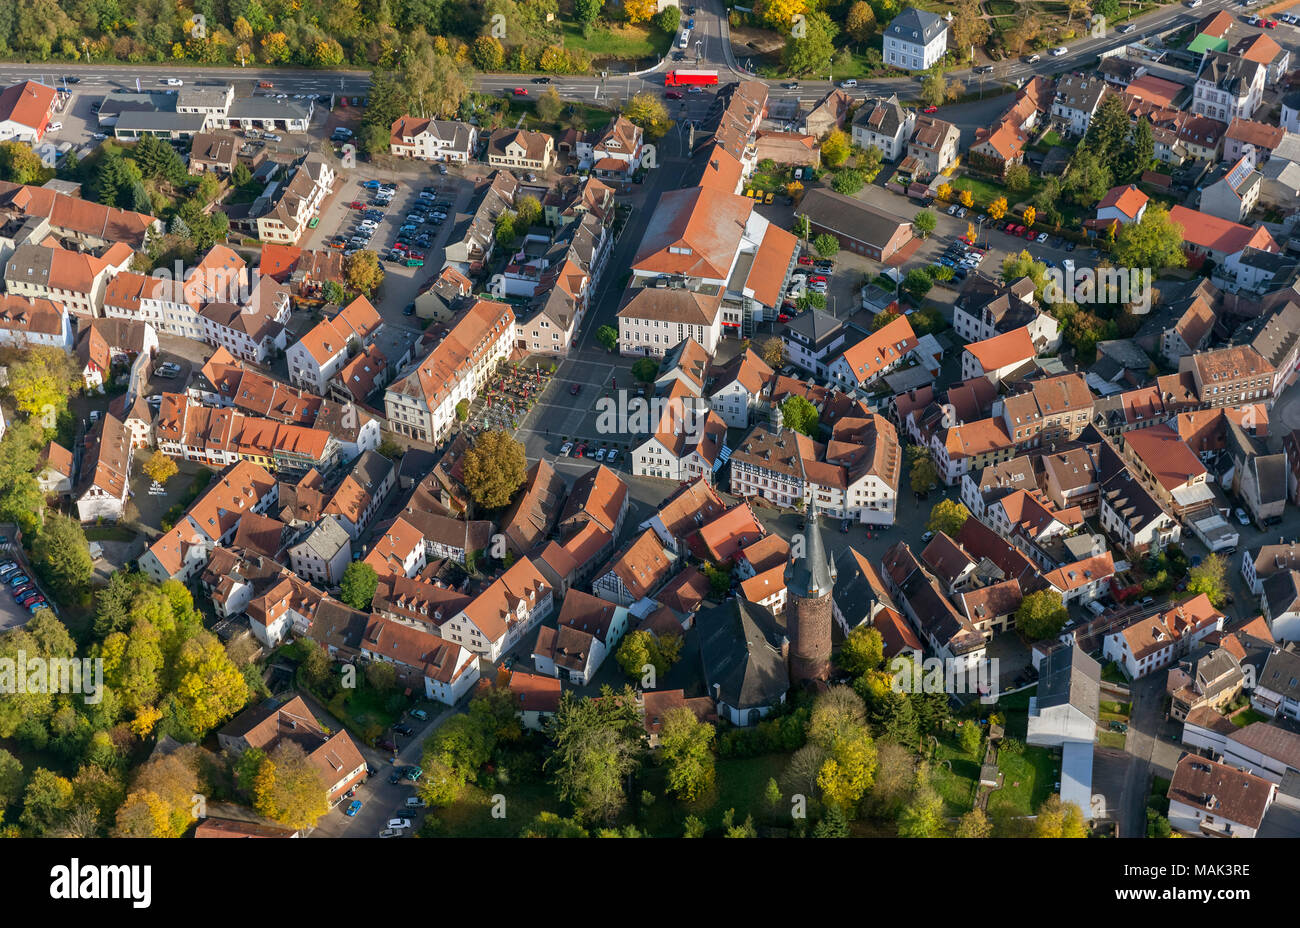 Aerial view, old town with half-timbered houses, Alter Turm, Ottweiler, Saarland, Germany, Europe, birds-eyes view, aerial view, aerial photography, a Stock Photo